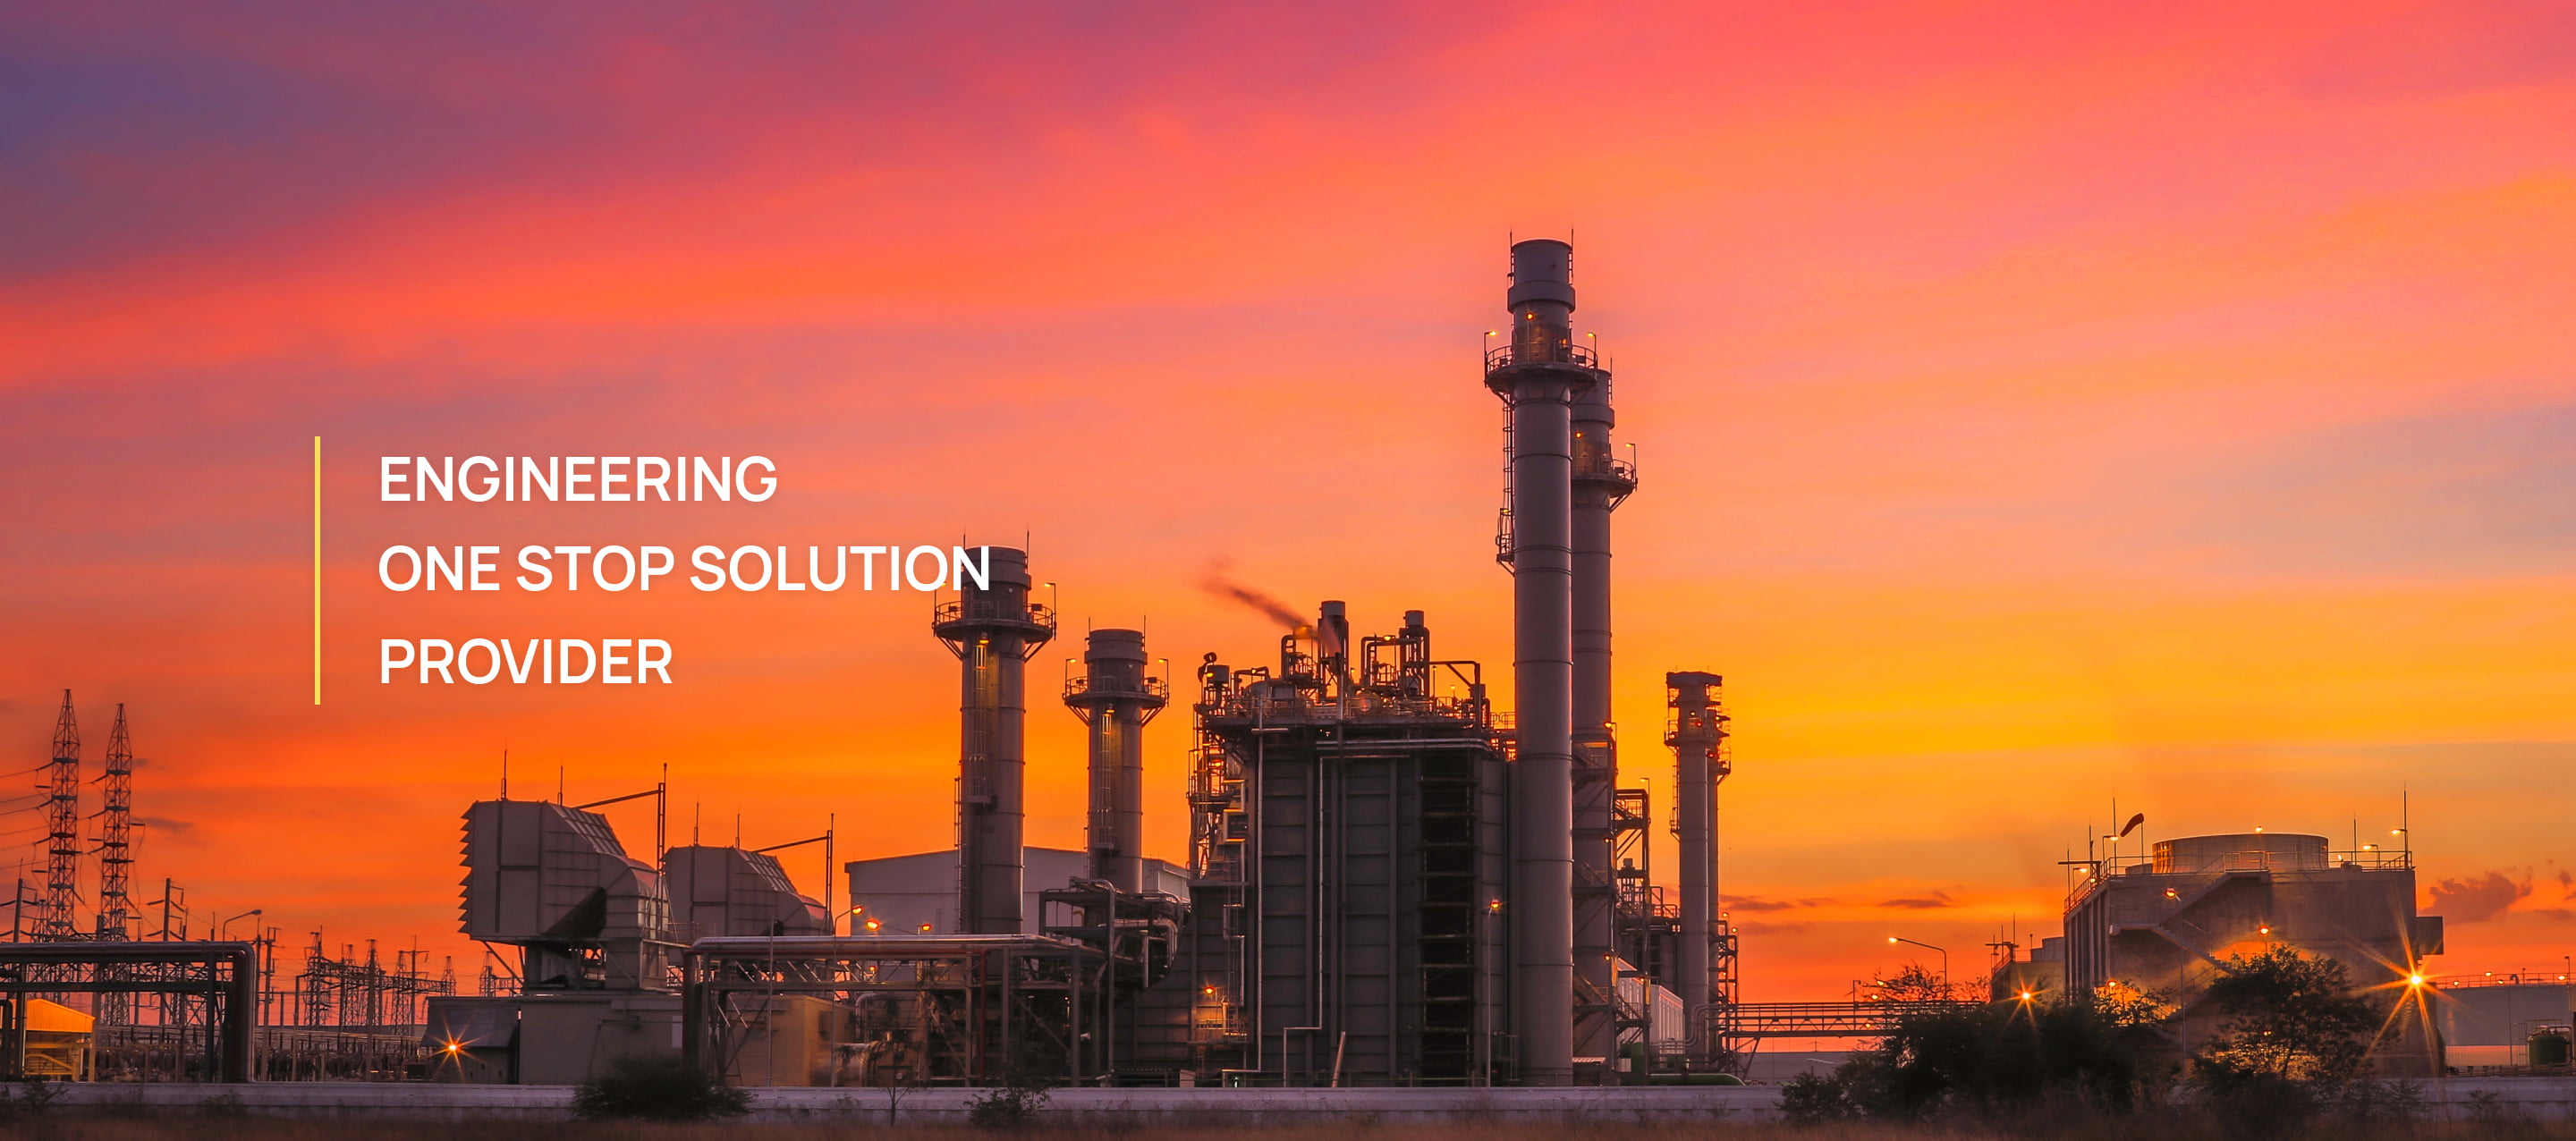 ENGINEERING ONE STOP SOLUTION PROVIDER